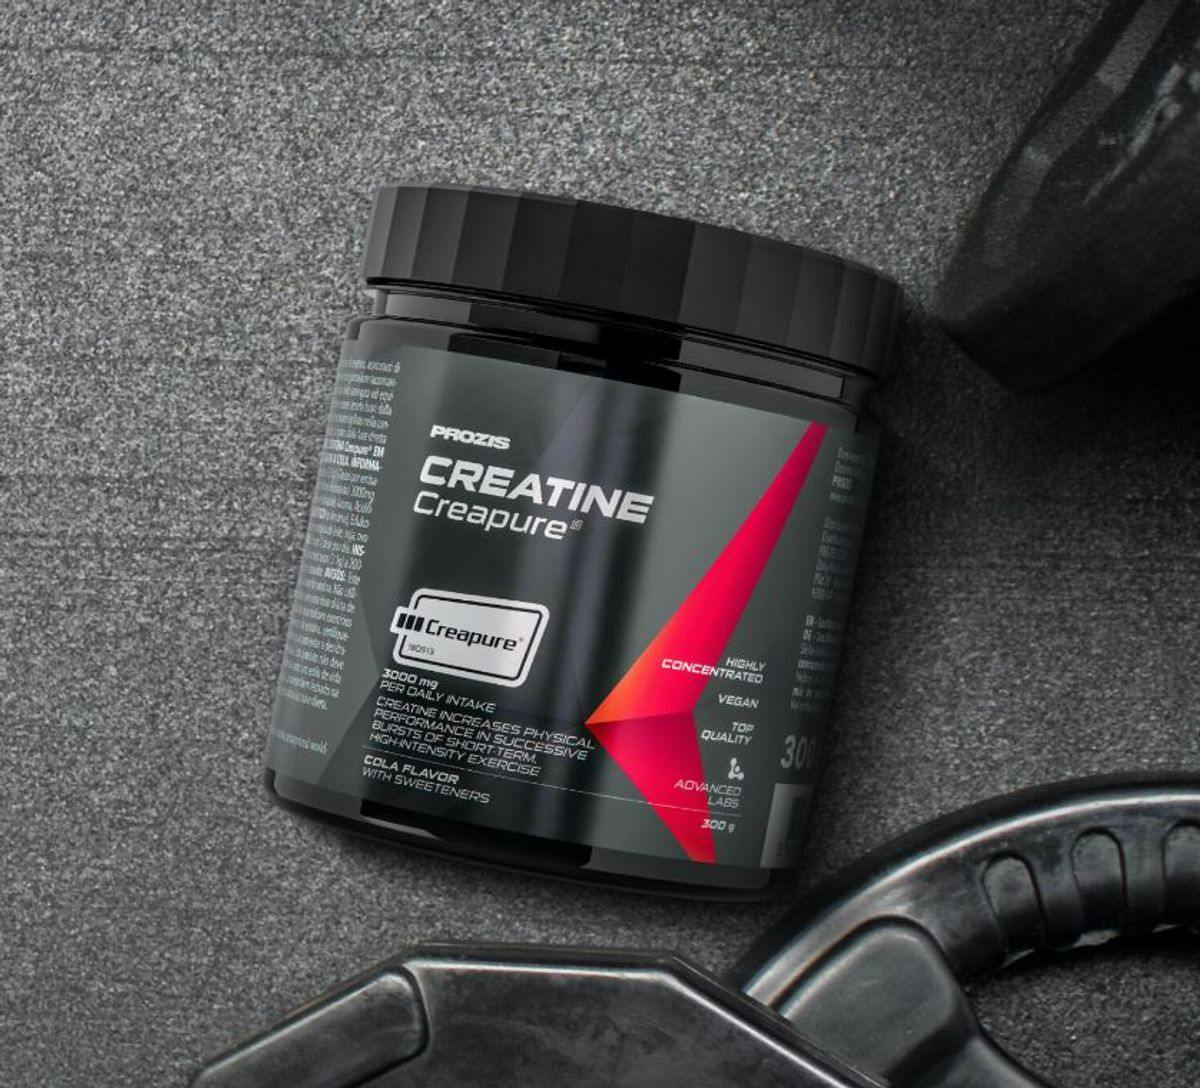 Creatine Benefits that you probably didn't know post cover